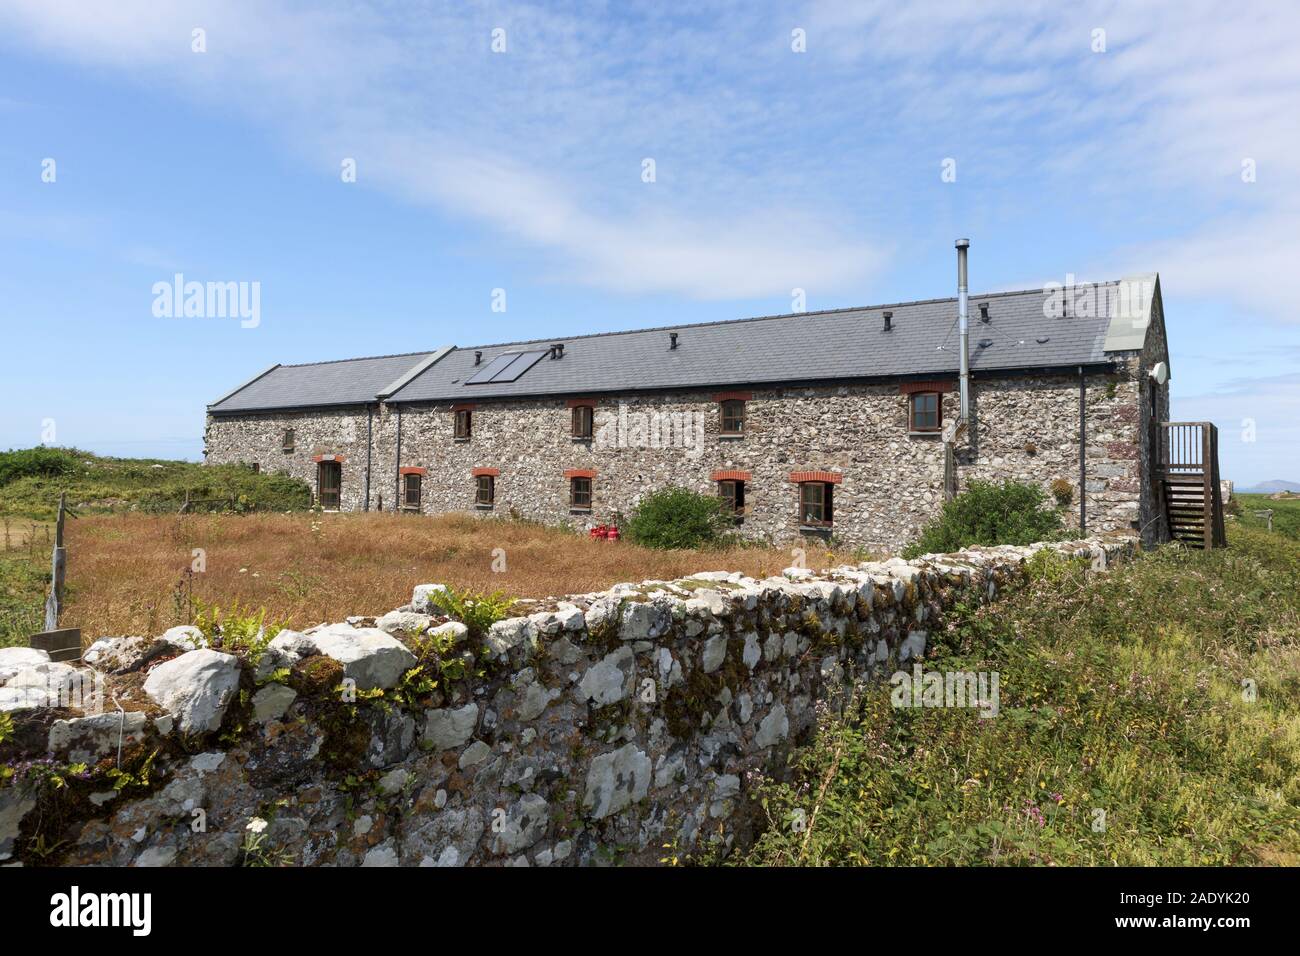 The renovated part of the Old Farm used as hostel accomodation on Skomer Island on the Pembrokeshire coast, west Wales Stock Photo